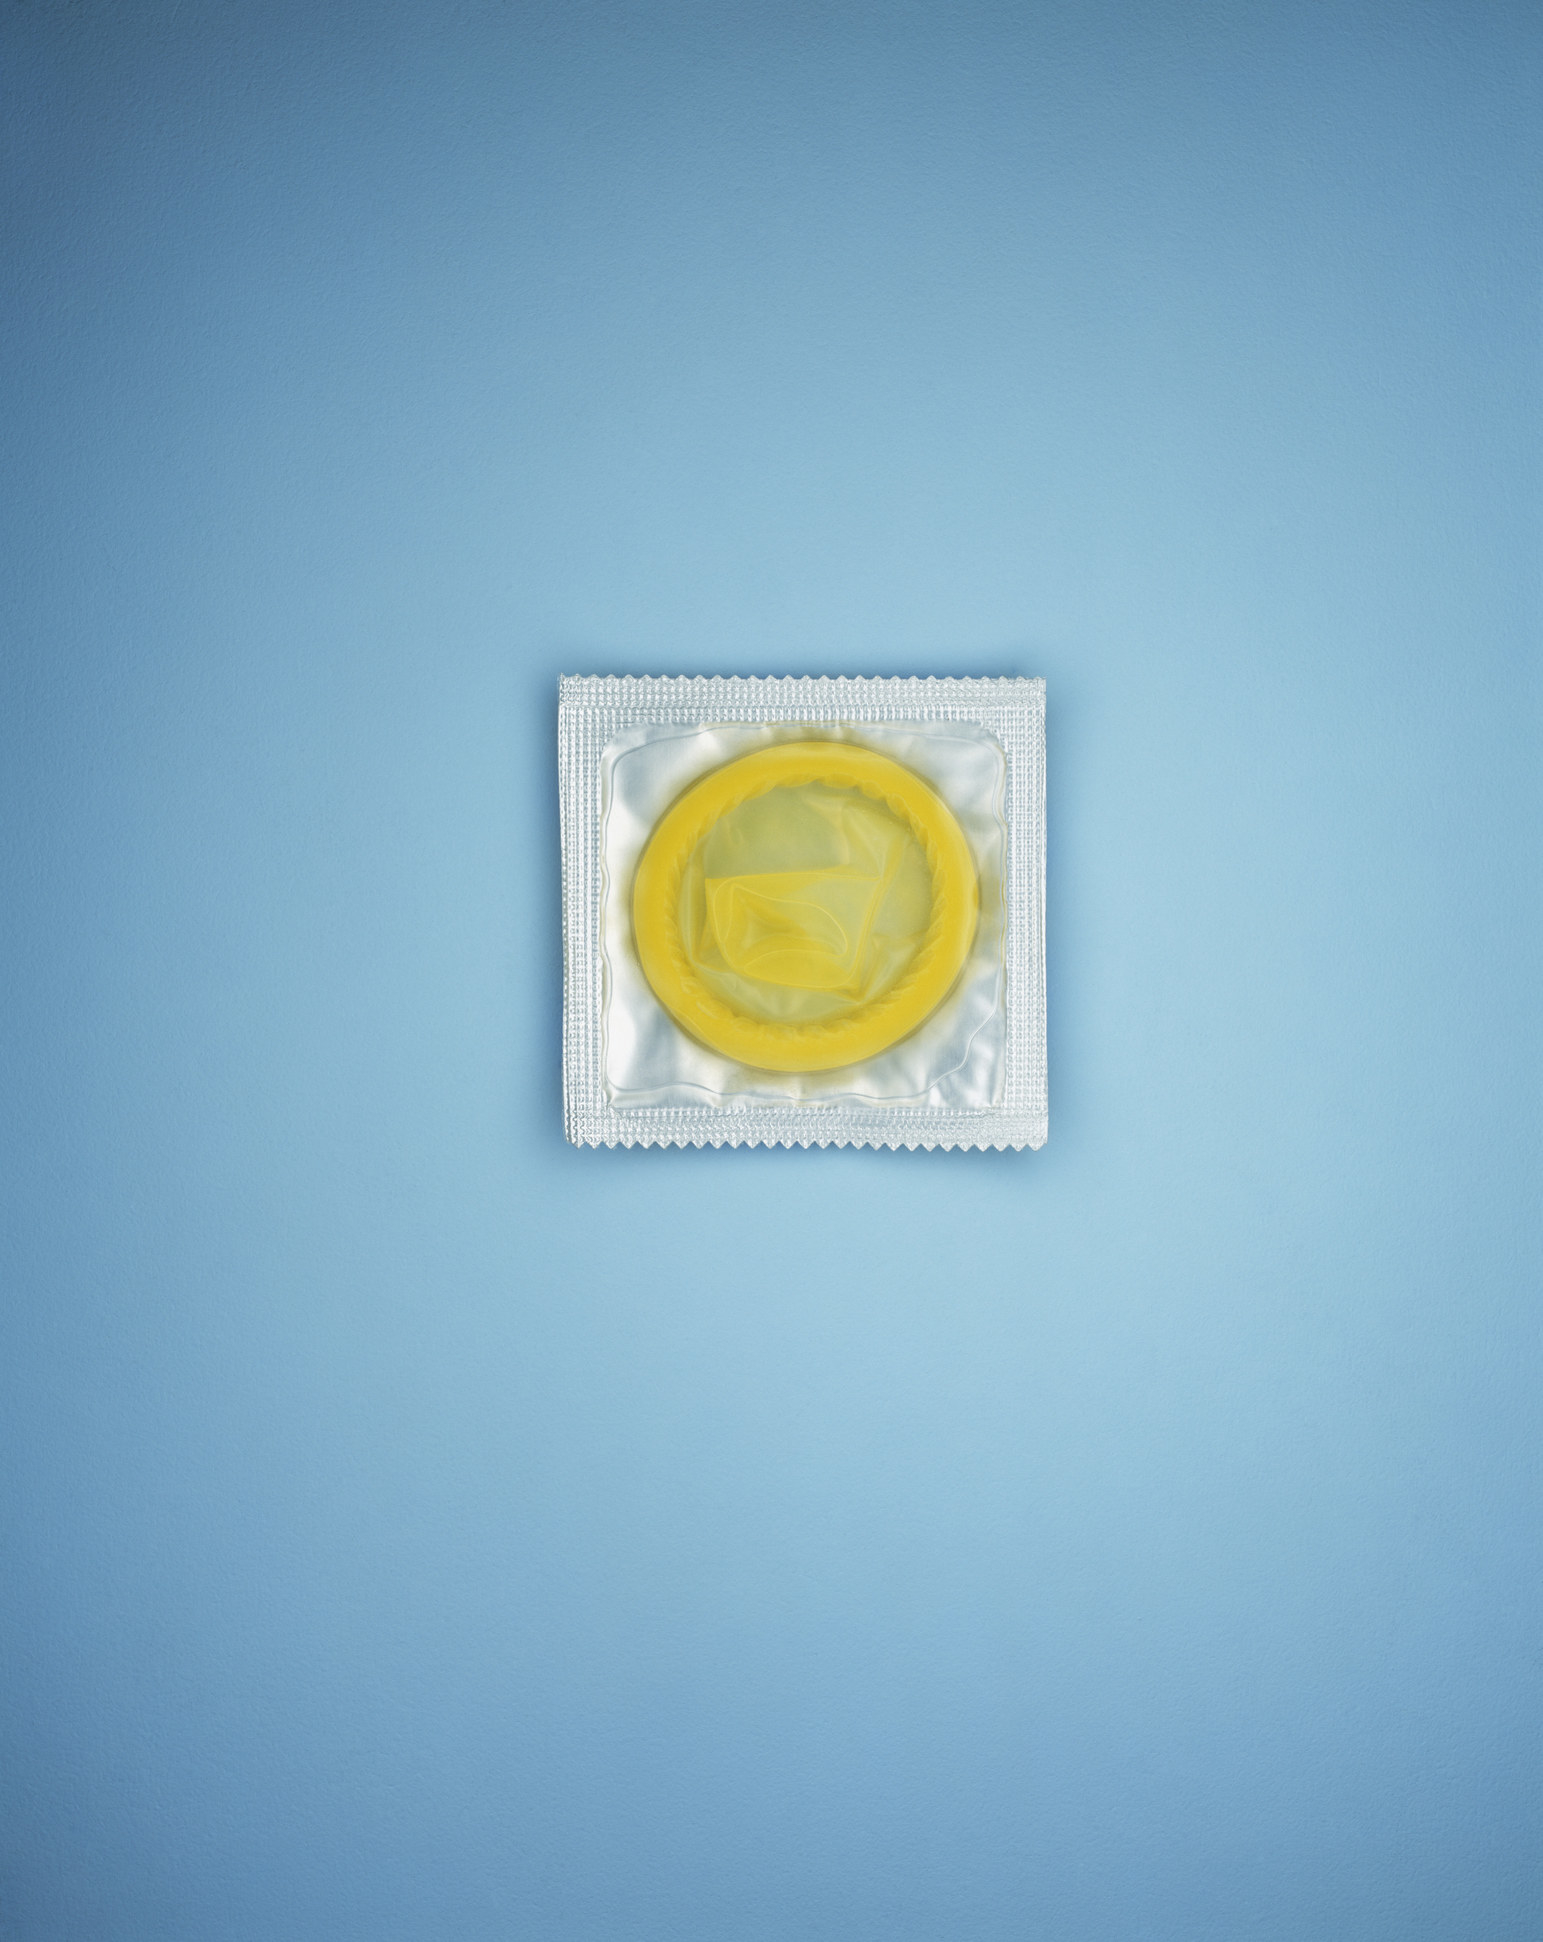 Stock image of a condom on a blue background